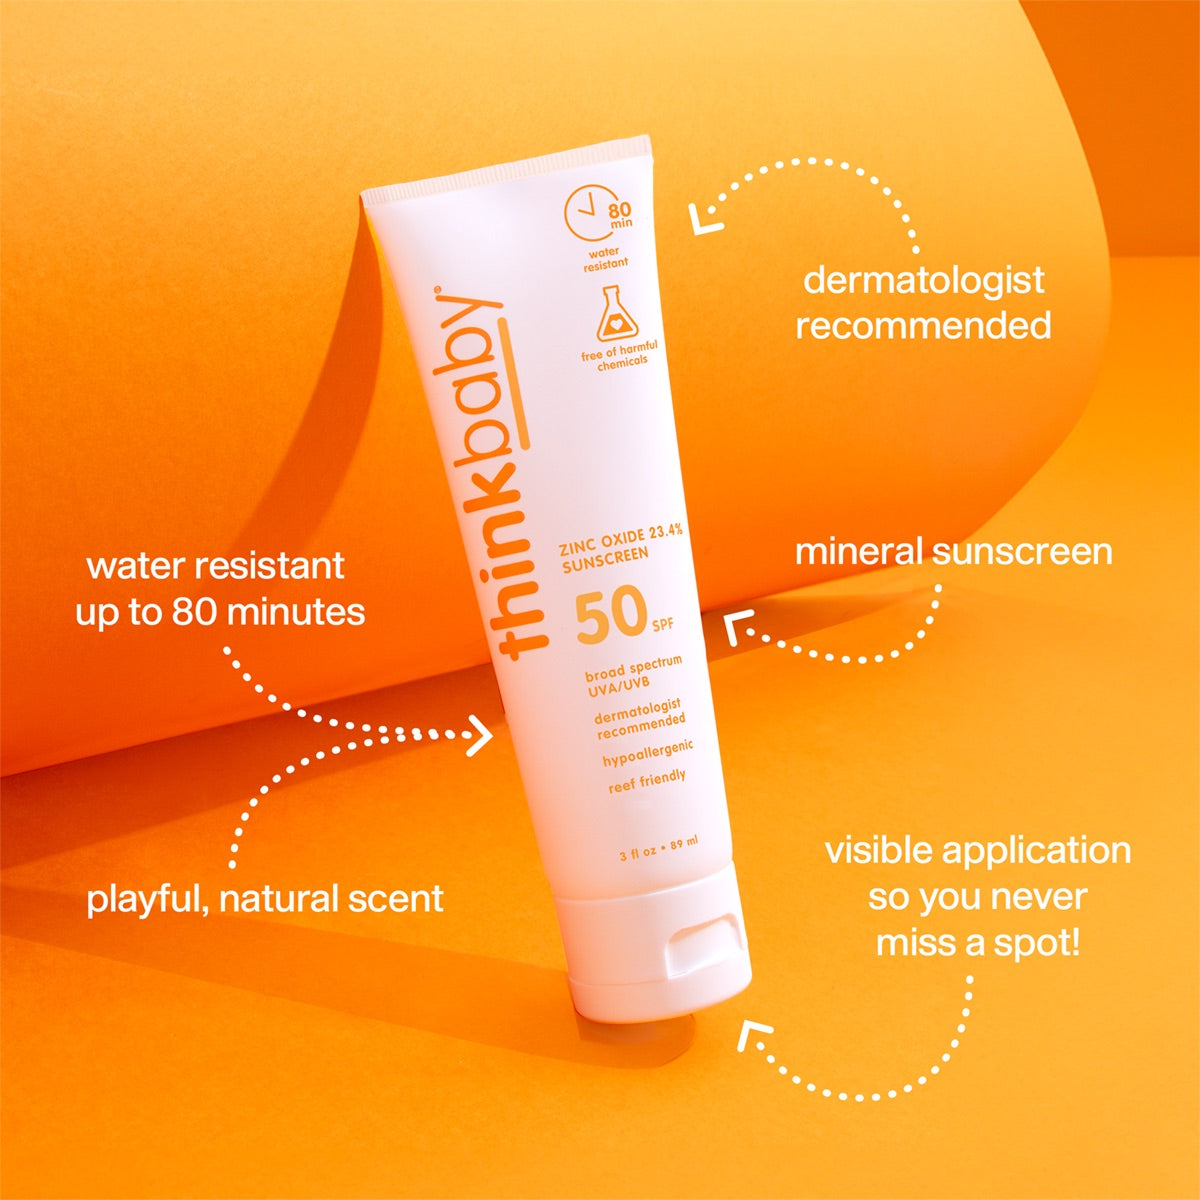 Flat lay of a Thinkbaby sunscreen tube highlighting features such as water resistance for up to 80 minutes, mineral-based ingredients, and a playful natural scent.